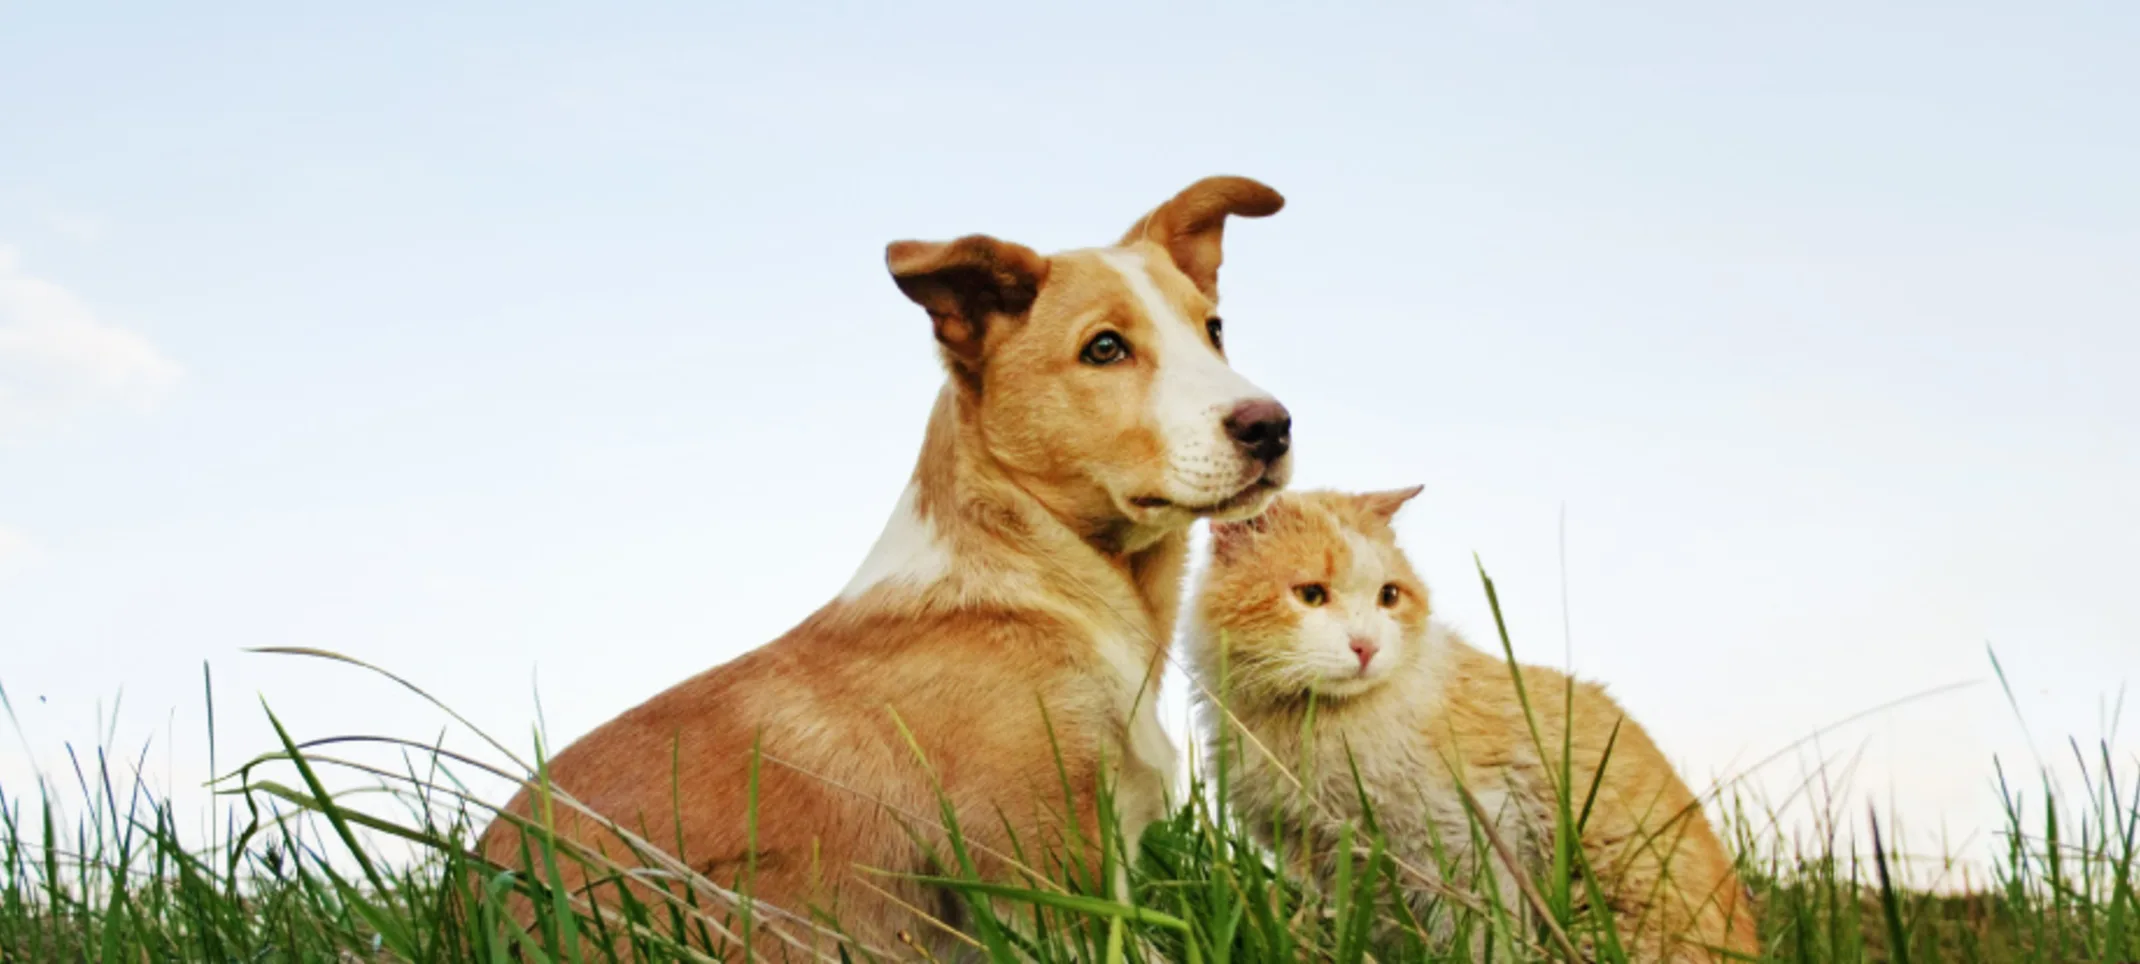 Dog and Cat sitting together on green grass with blue sky above them